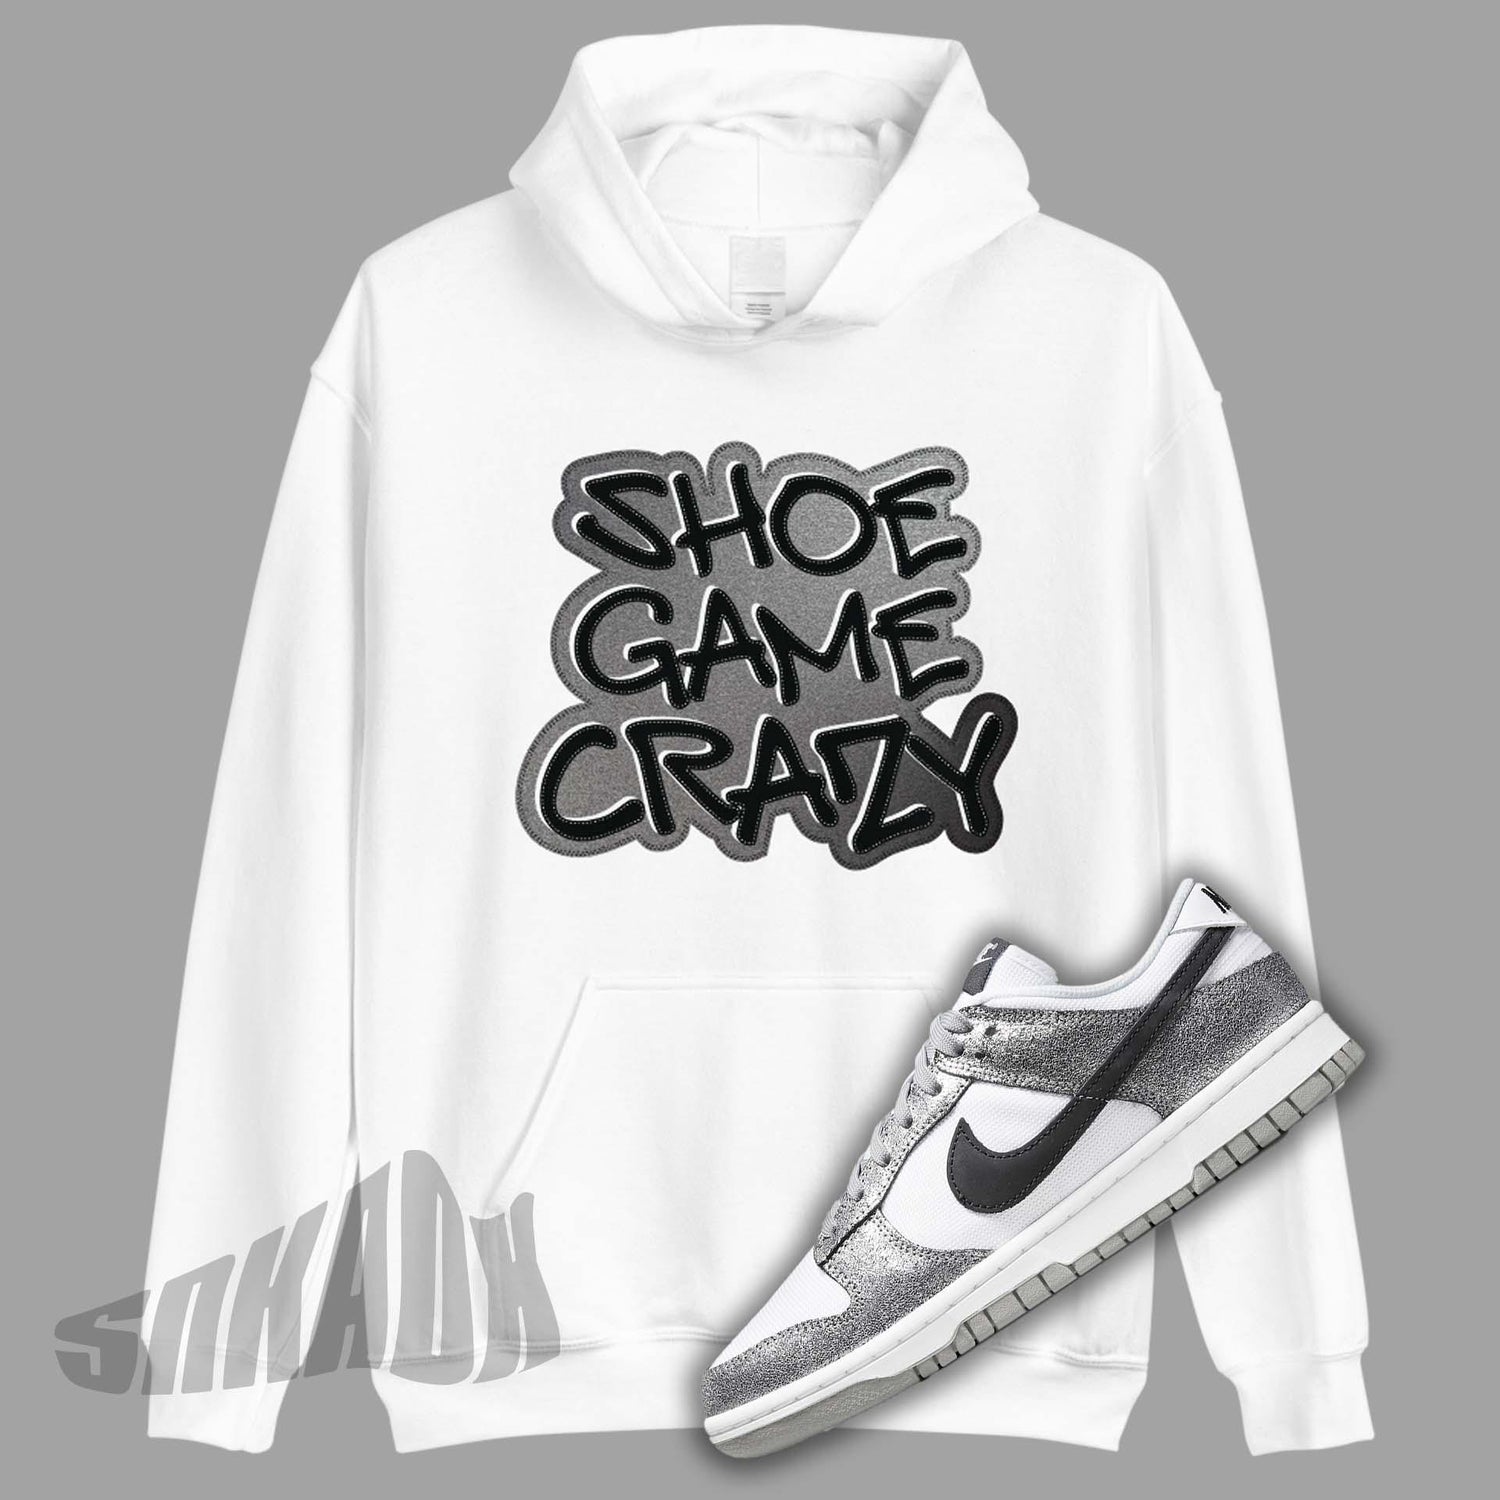 Shoe game crazy hoodie to match Nike Dunk Golden Gals